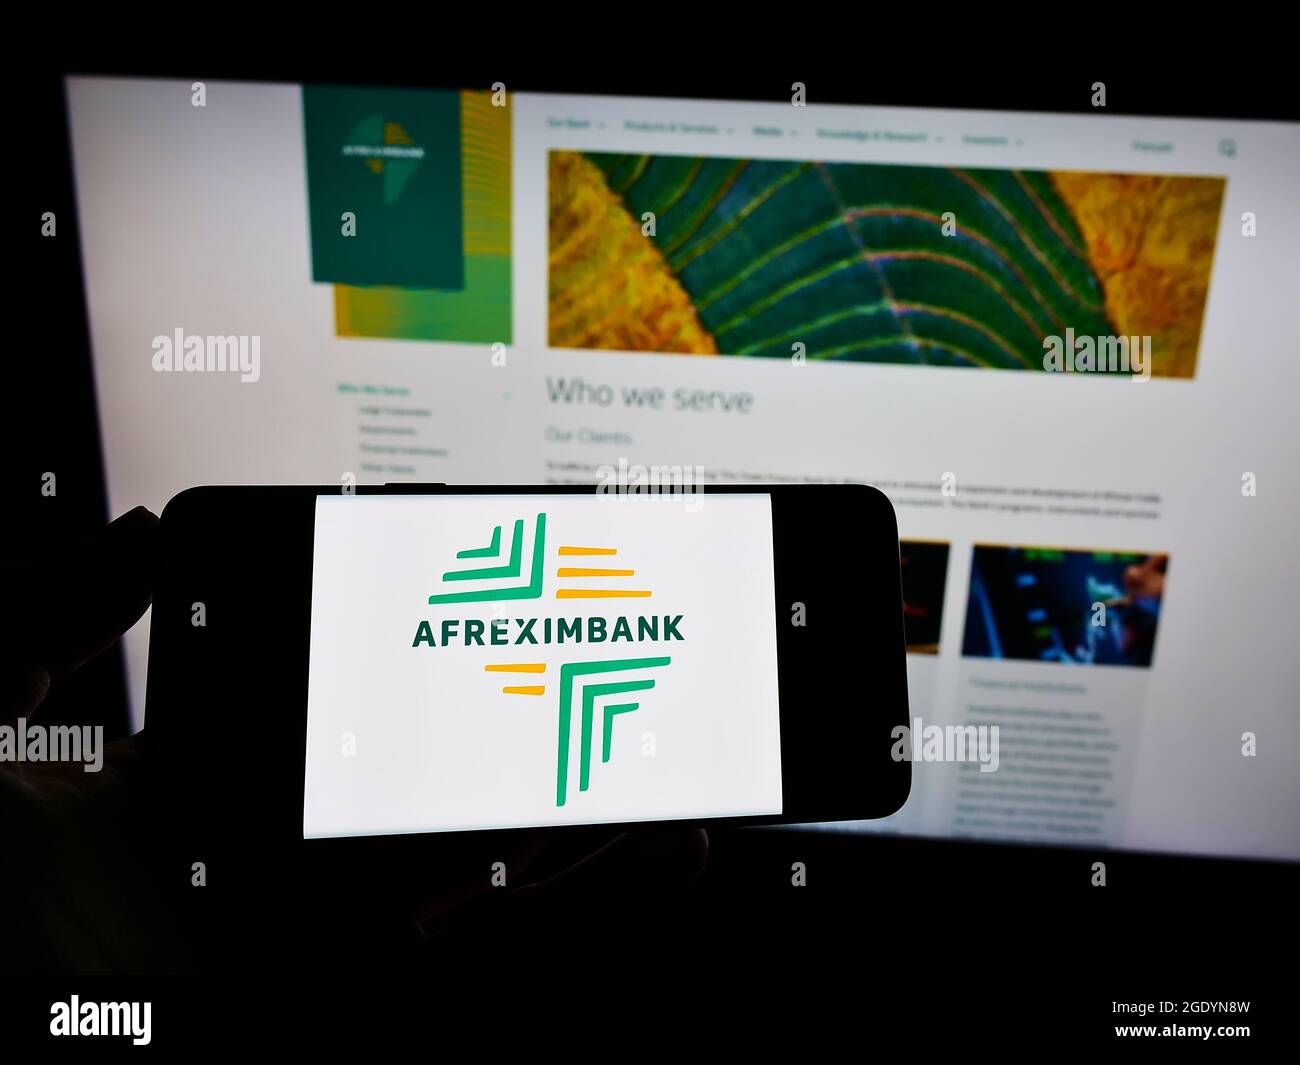 Person holding cellphone with logo of company African Export–Import Bank (Afreximbank) on screen in front of webpage. Focus on phone display. Stock Photo